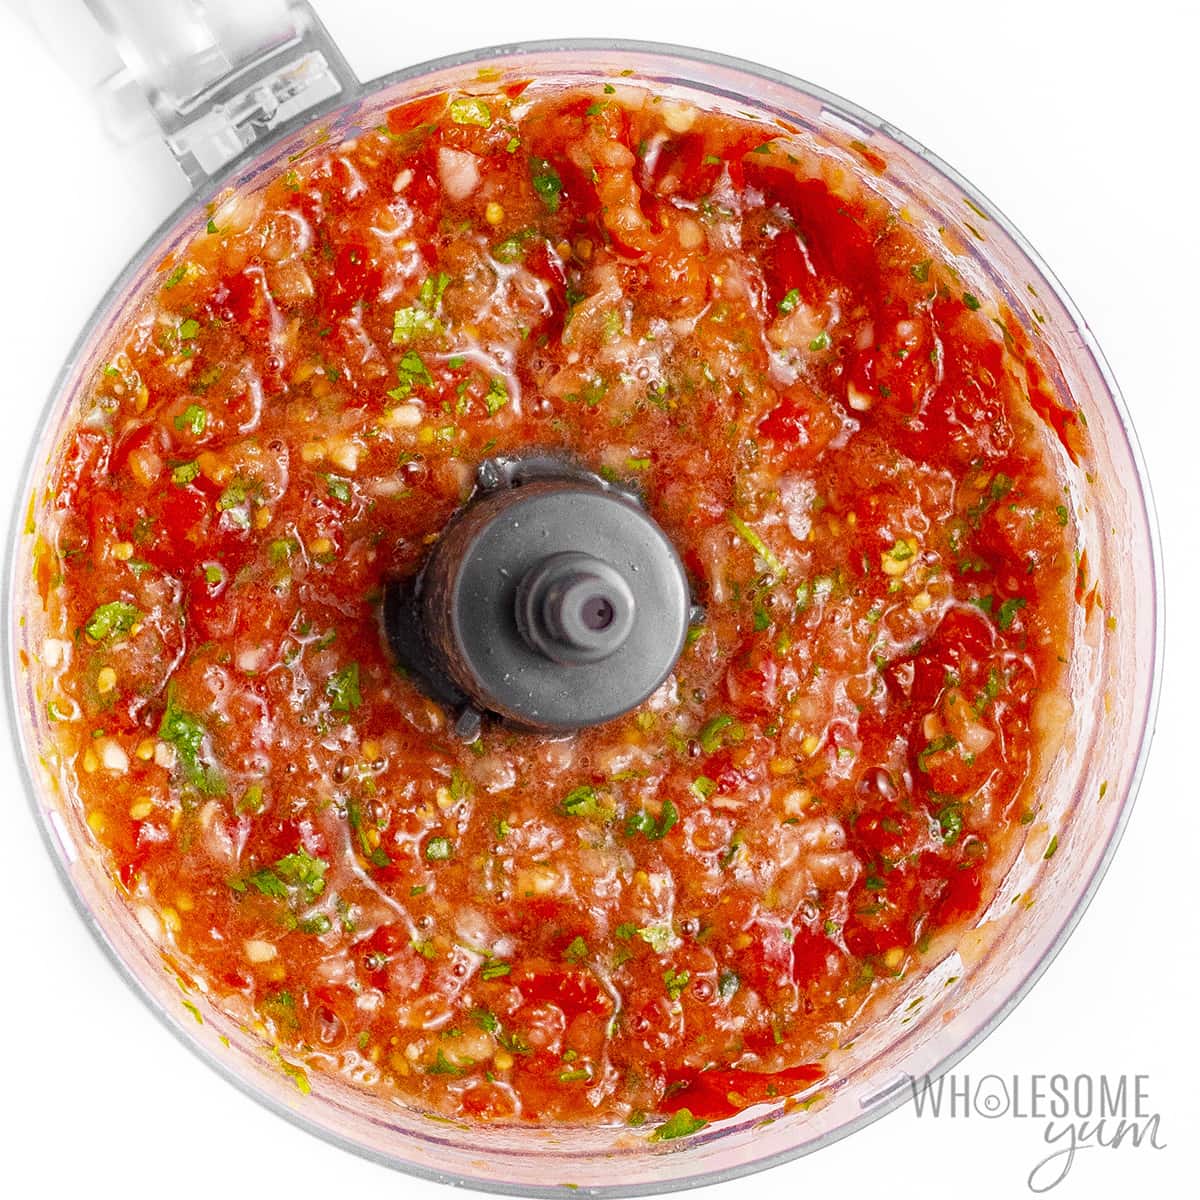 Blended fresh salsa in a food processor.